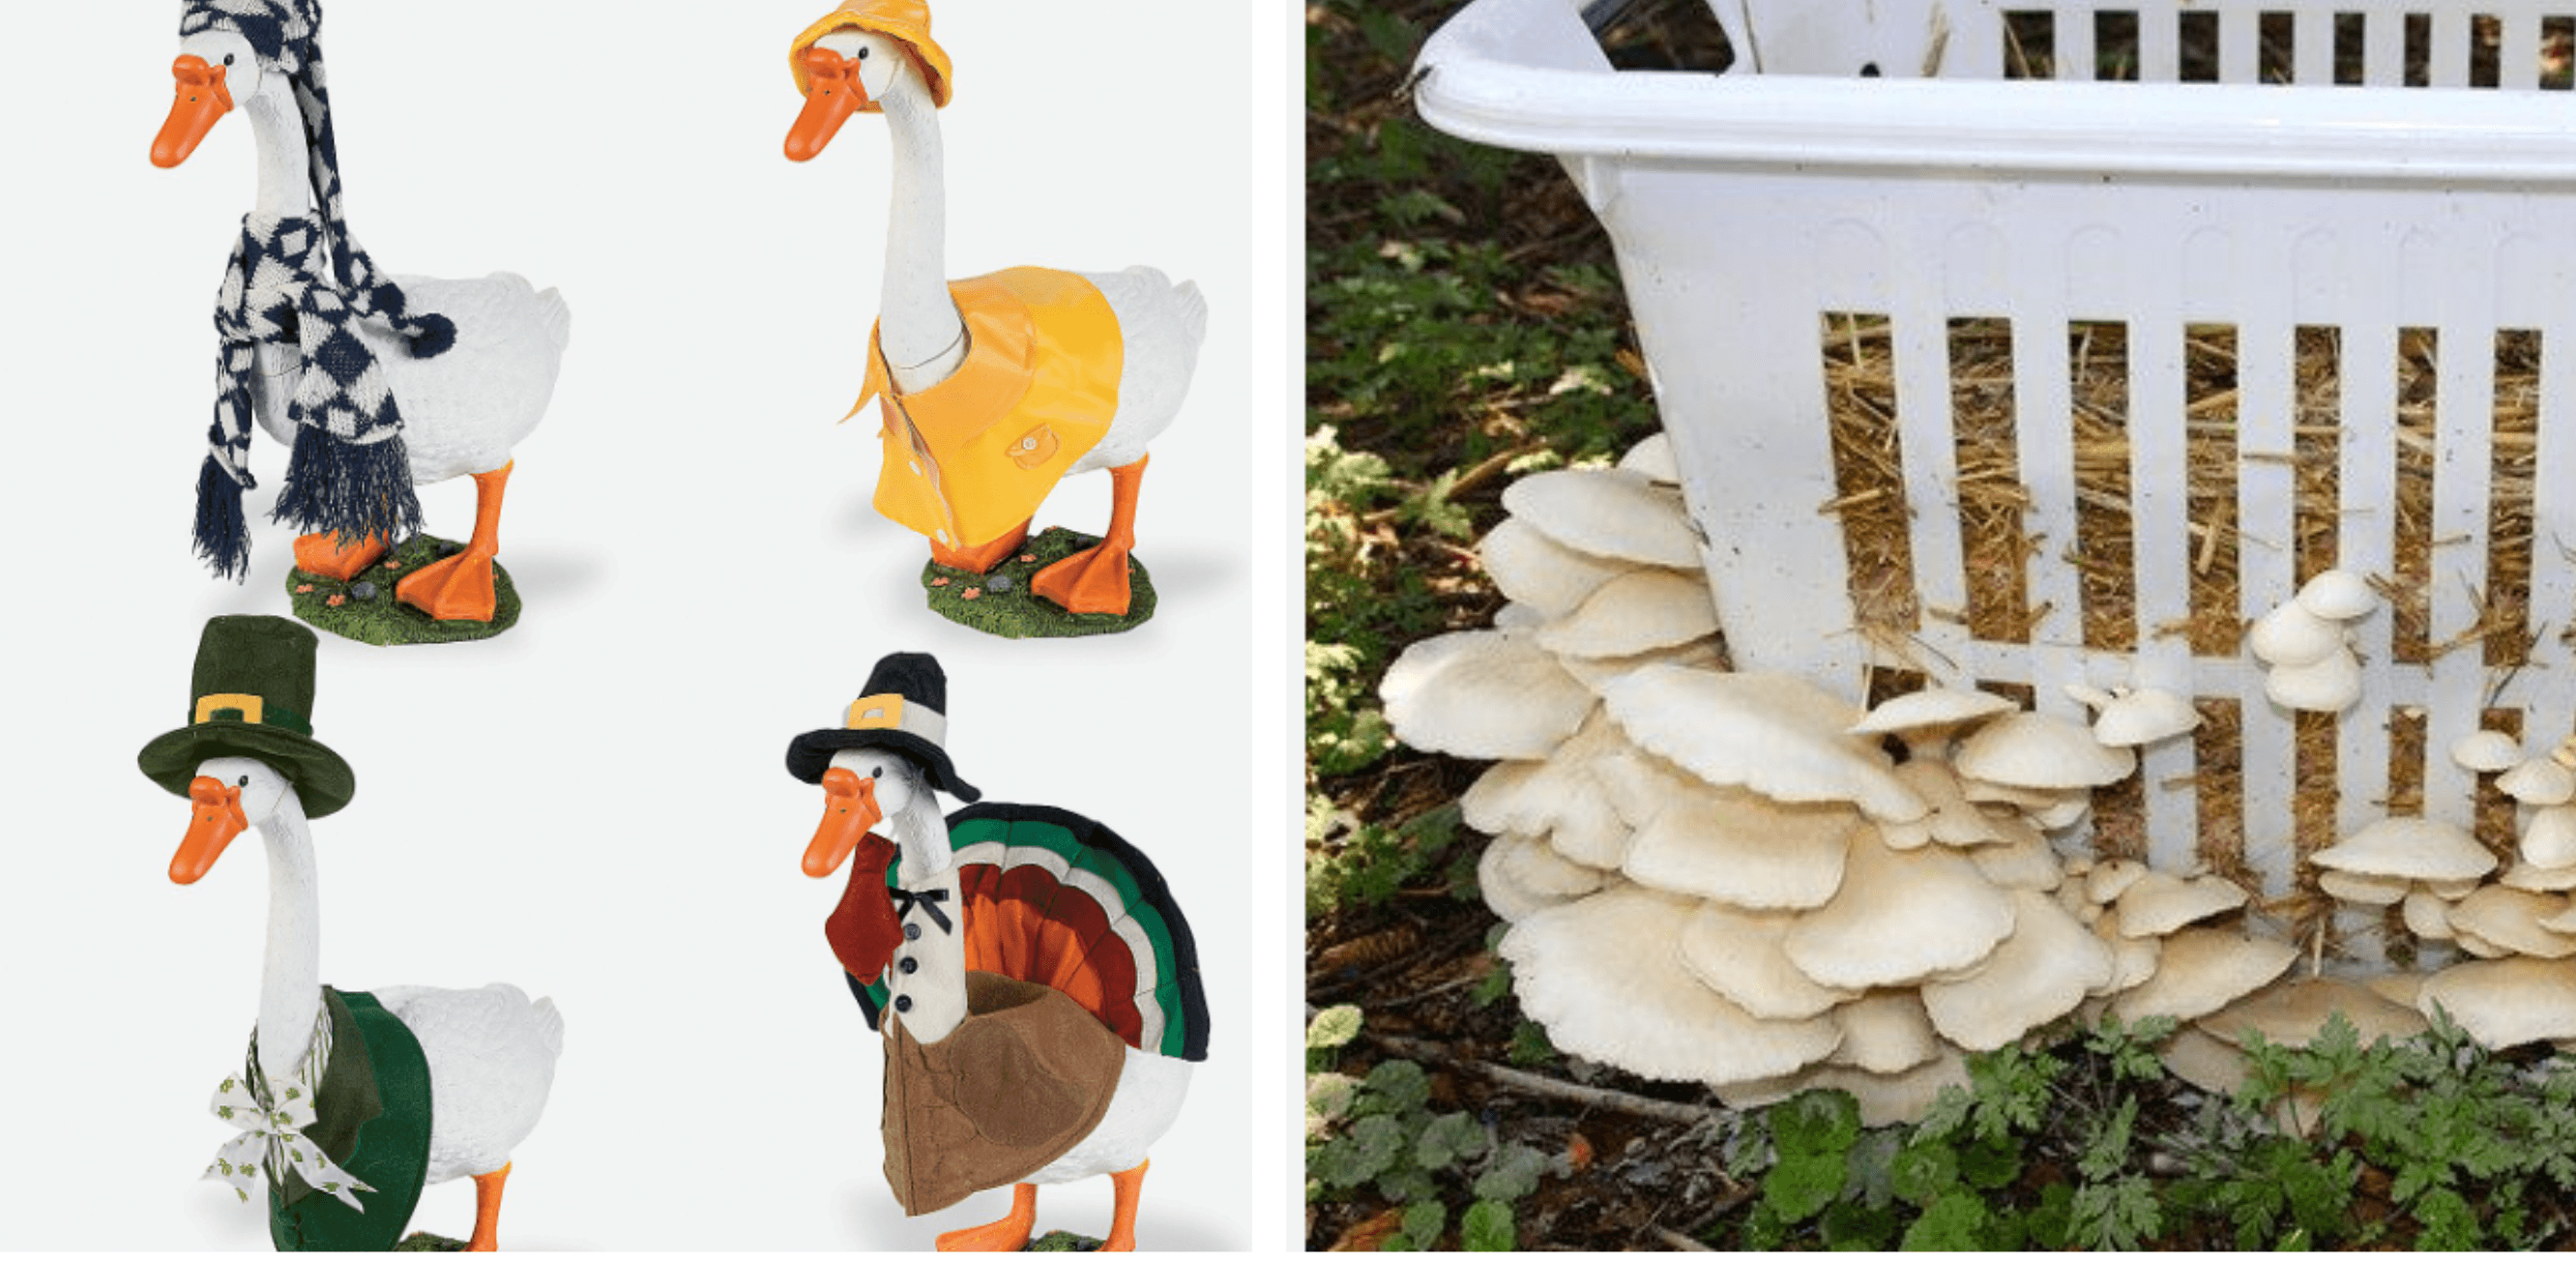 Geese in silly costumes. Laundry basket mushrooms.